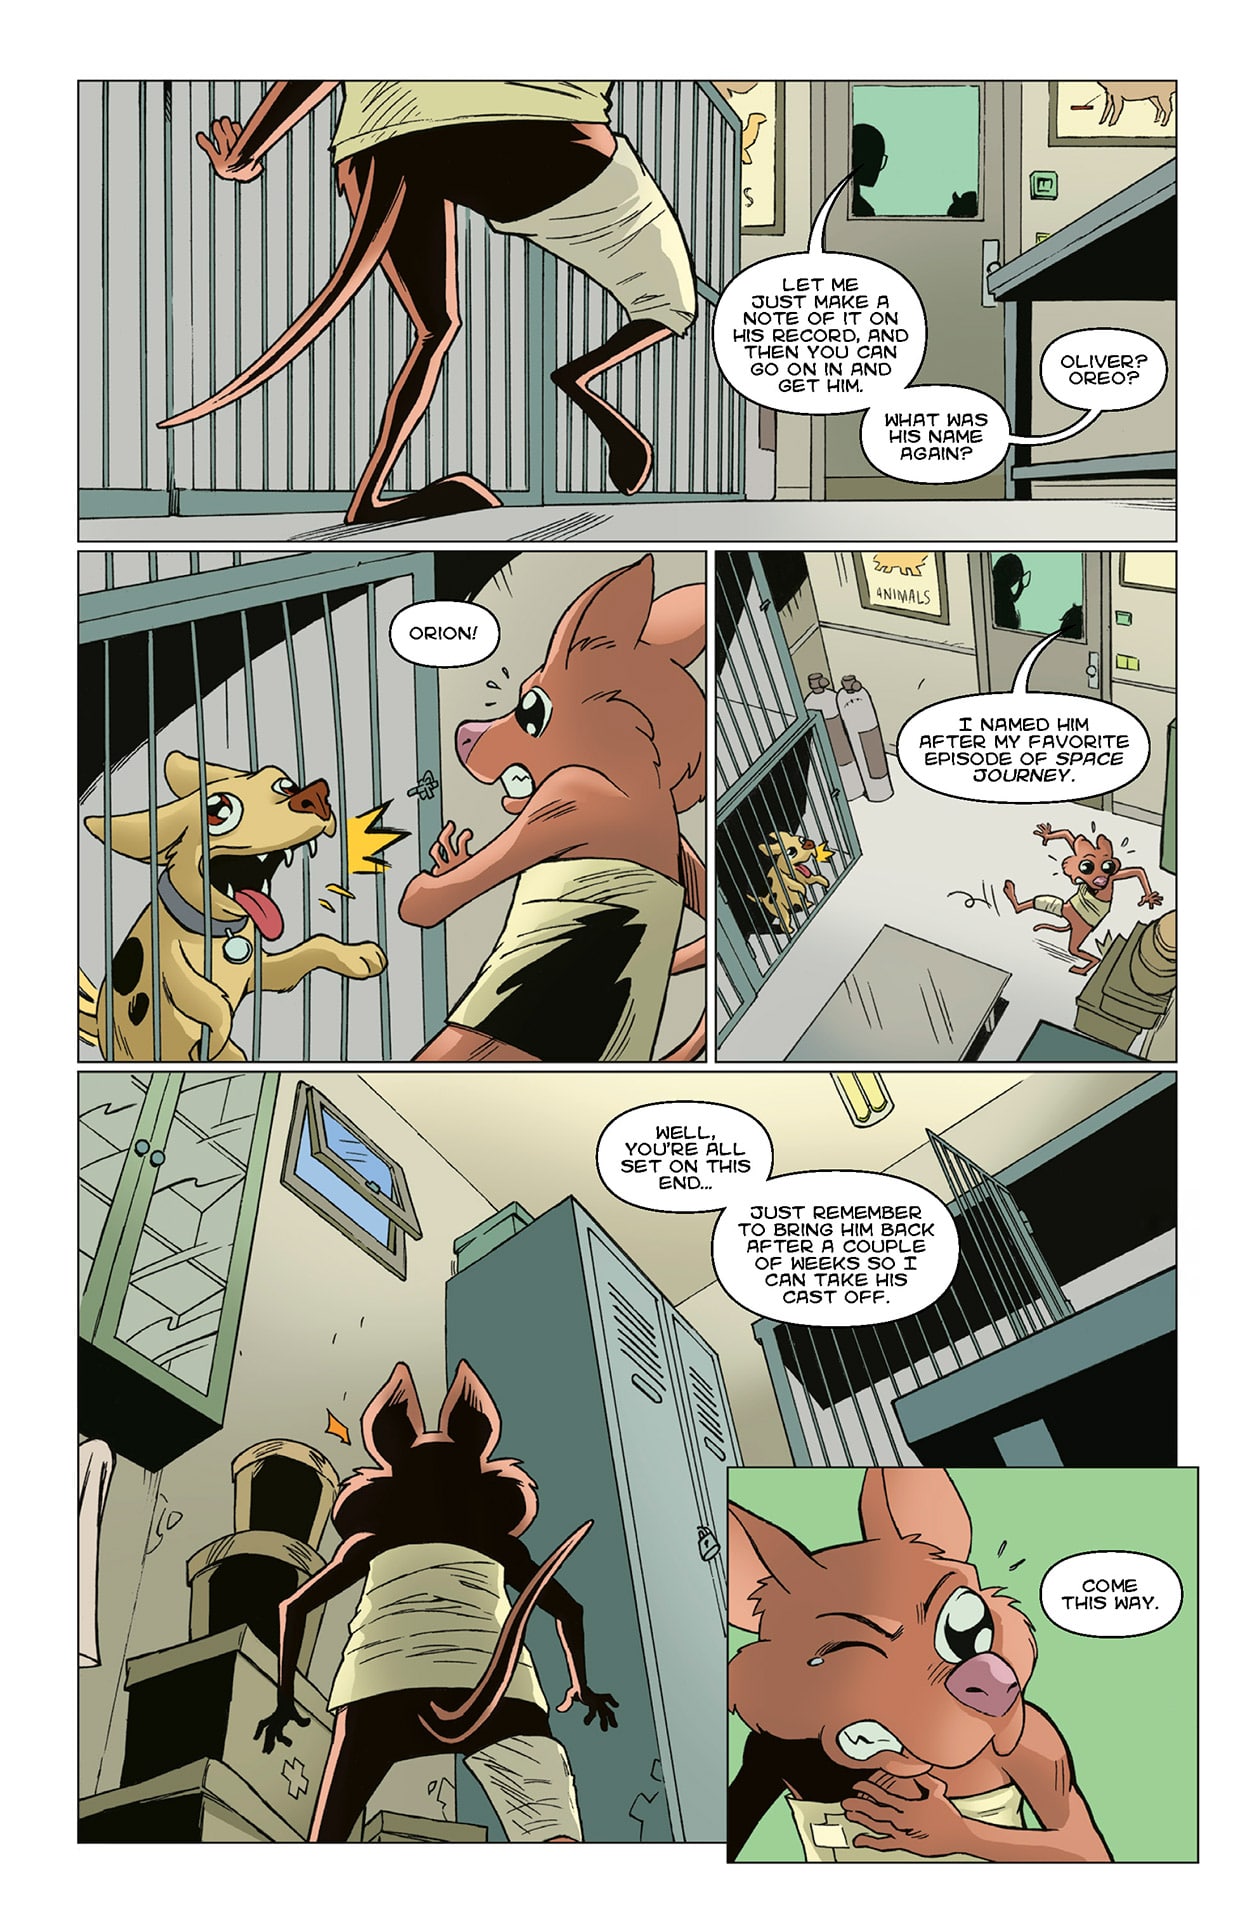 The Fell From The Sky #2, preview page 2